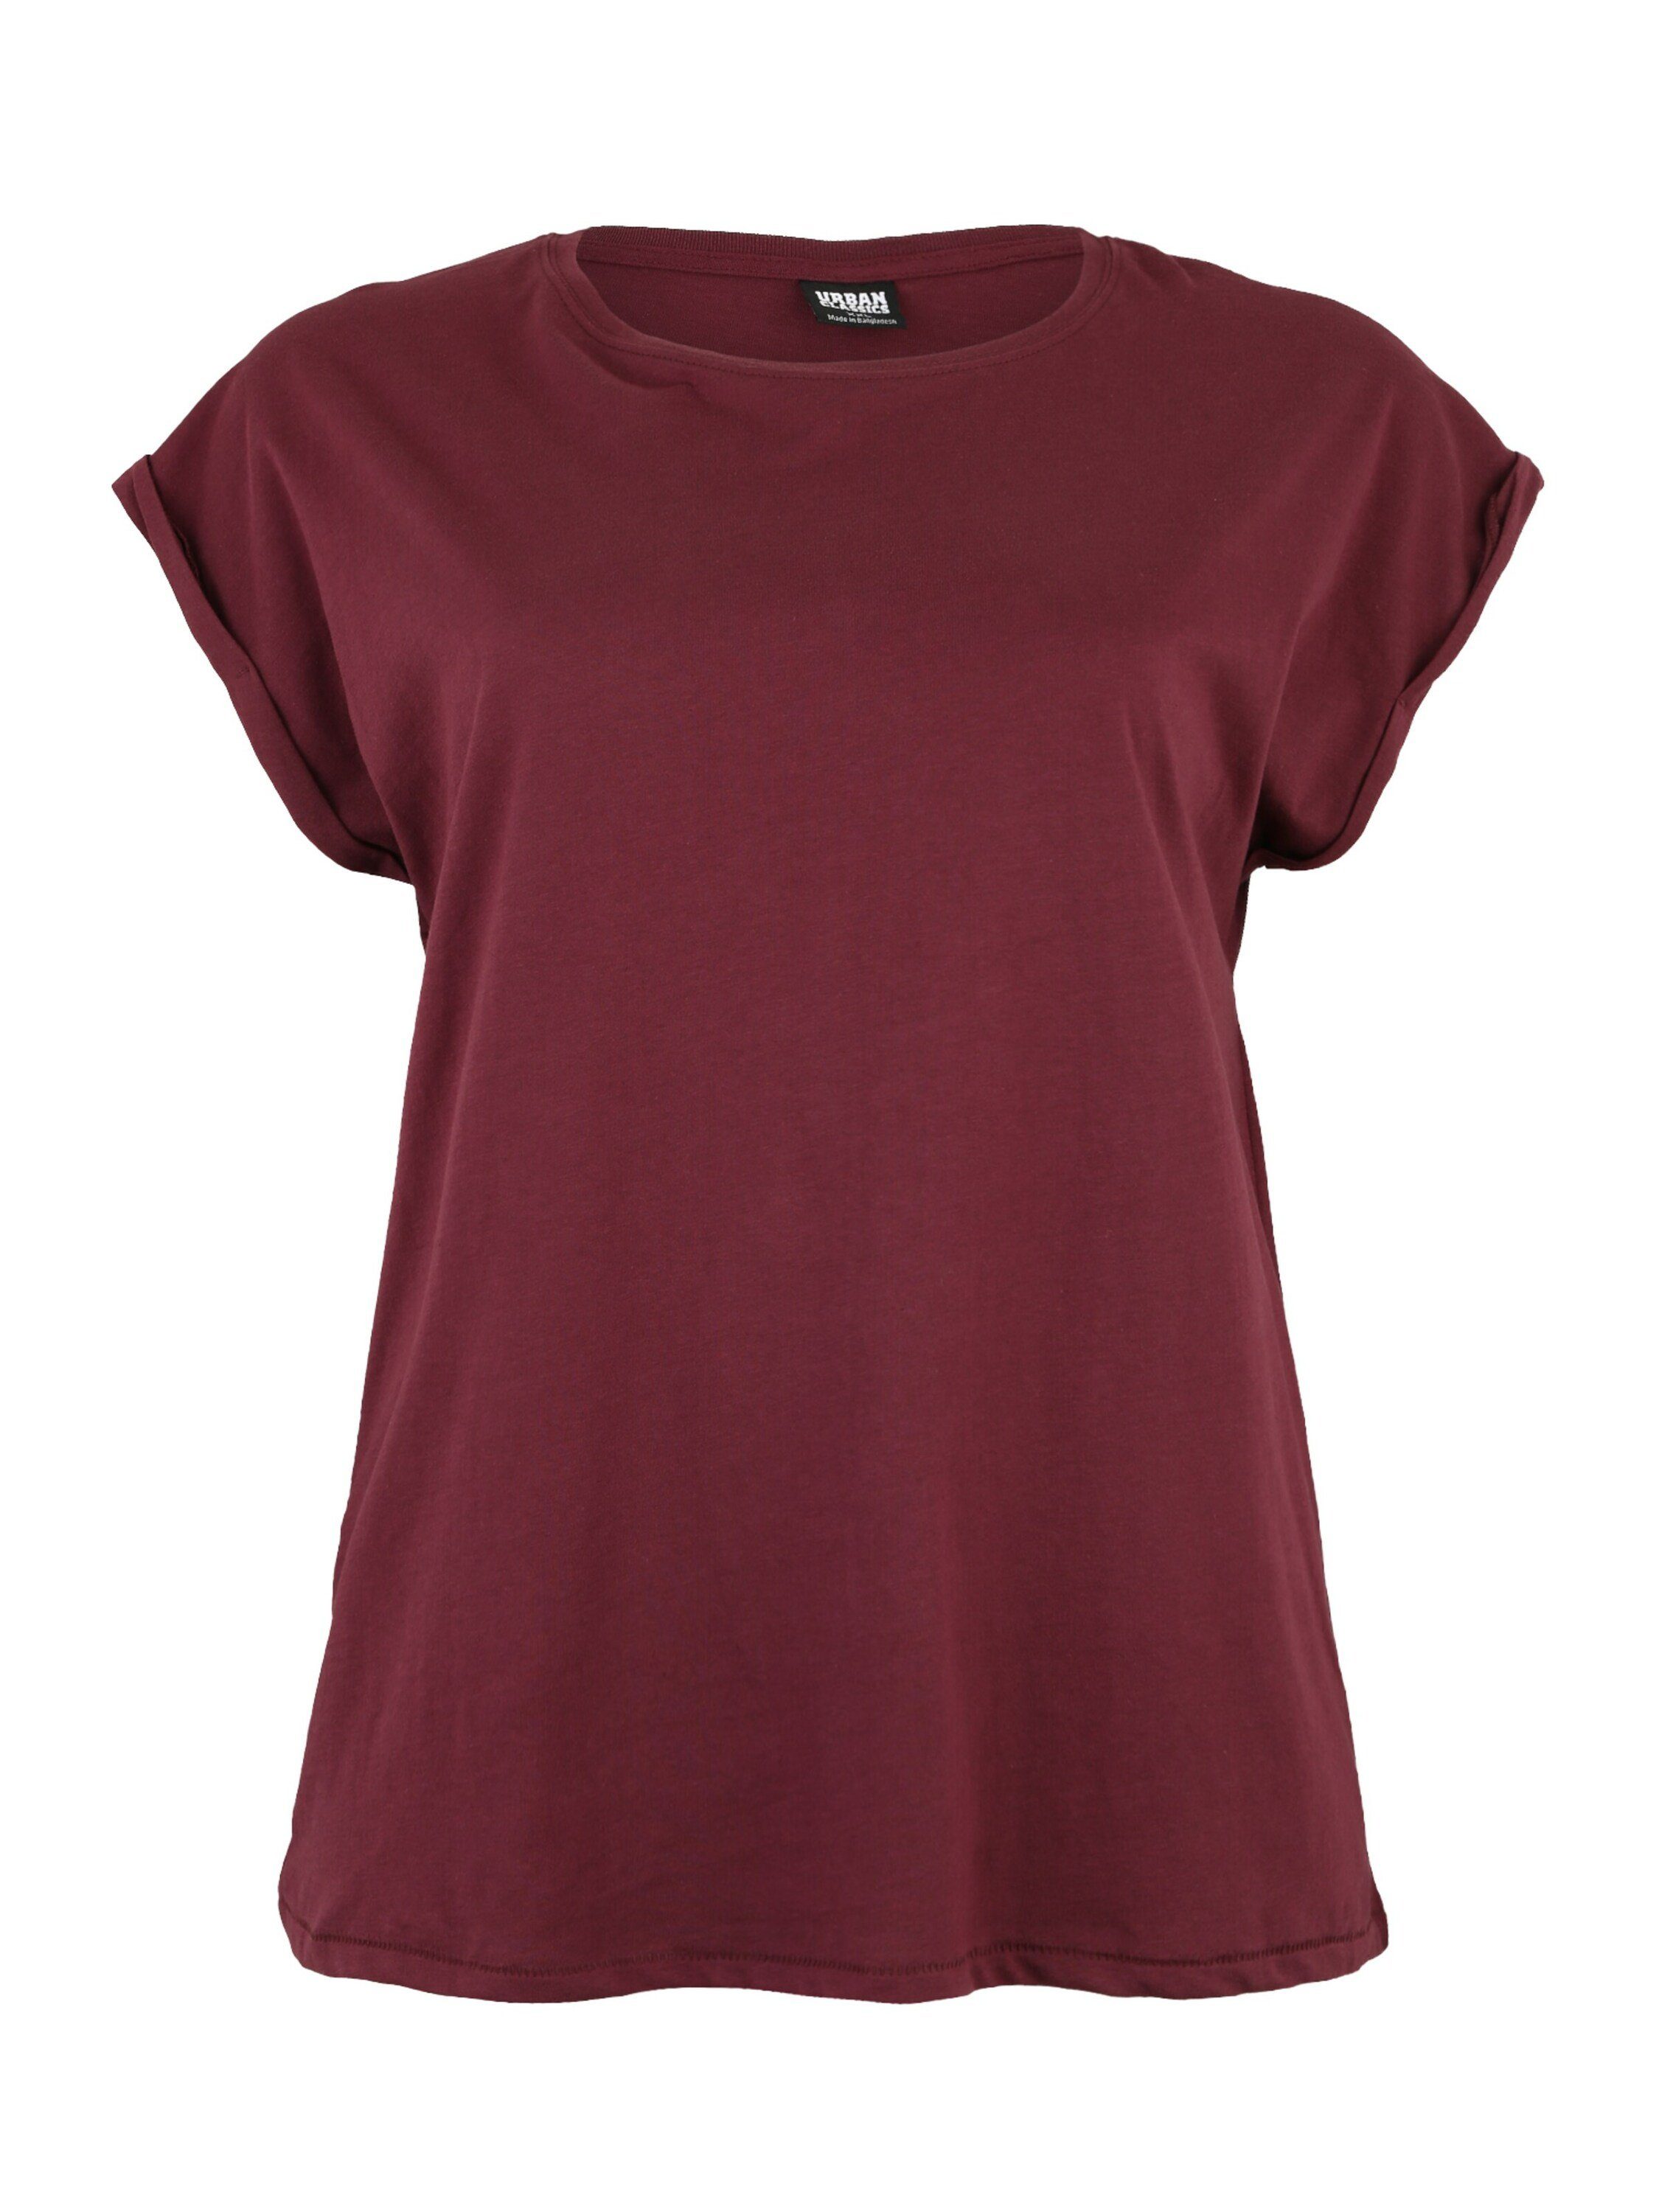 T-Shirt CLASSICS Details, (1-tlg) brombeer Plain/ohne URBAN Detail Weiteres